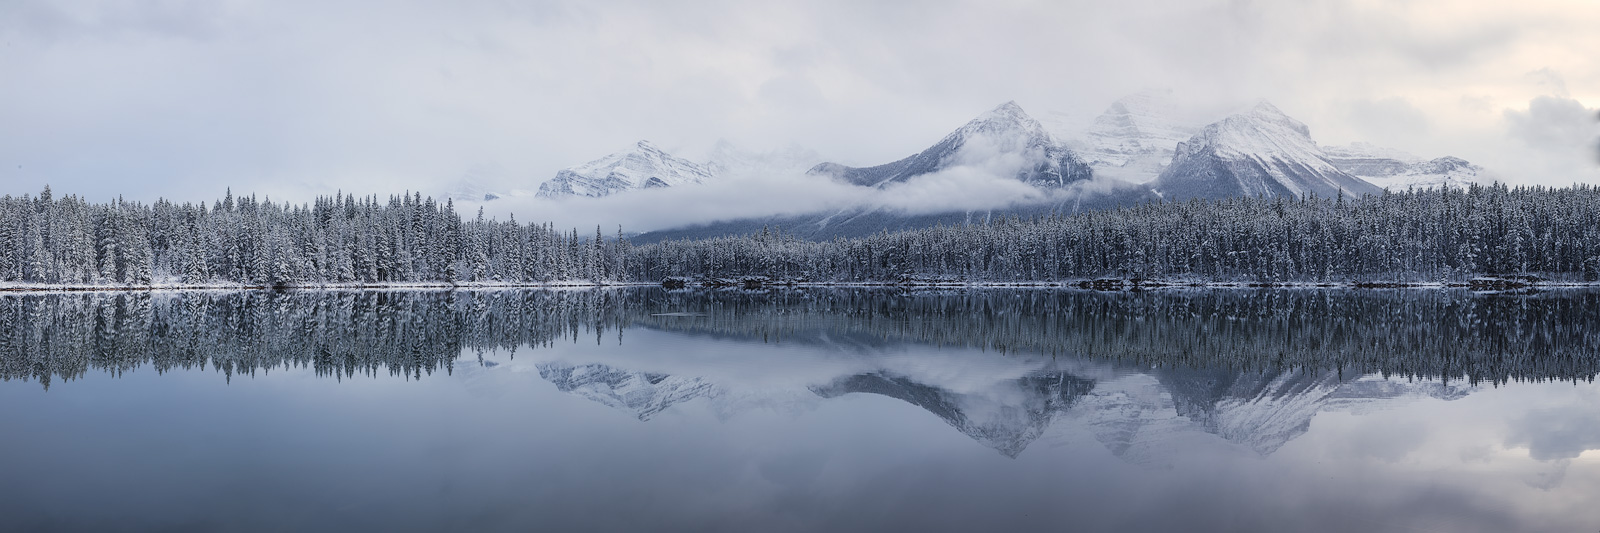 A wide pano of a snowy Winter scene in the majestic Canadian Rockies.